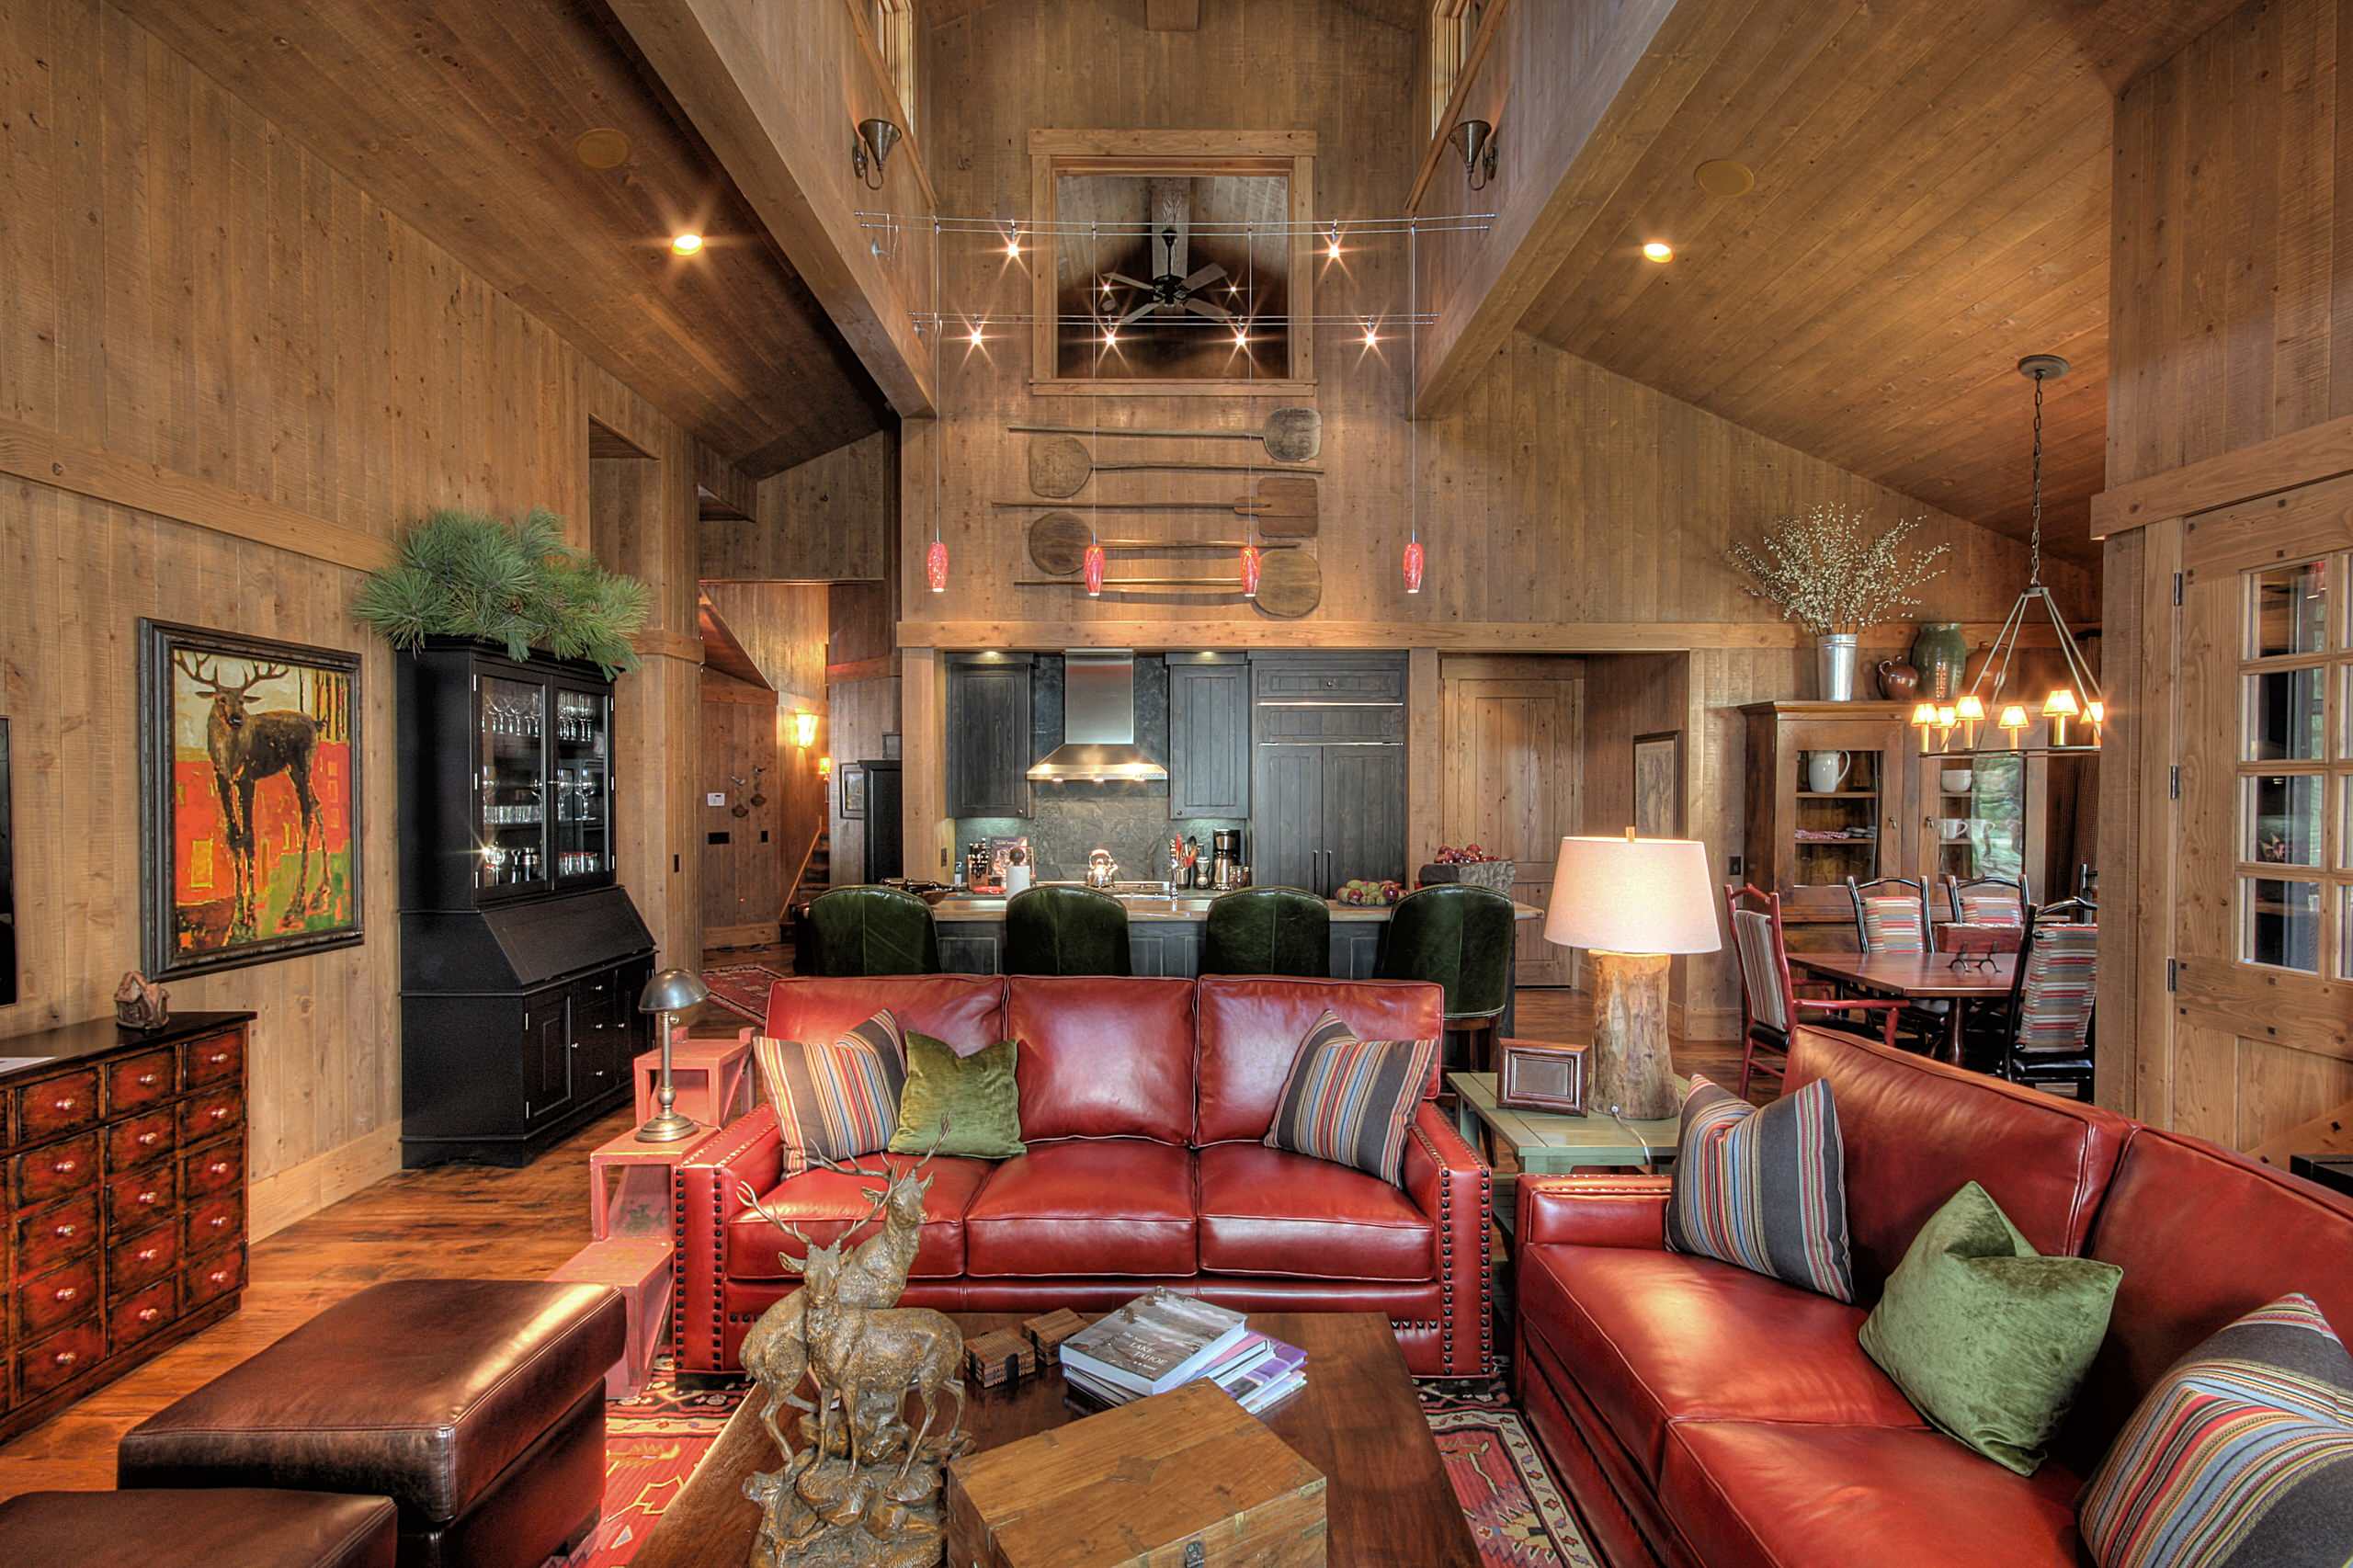 Red Leather Couch Photos Ideas Houzz, How To Decorate With Red Leather Furniture